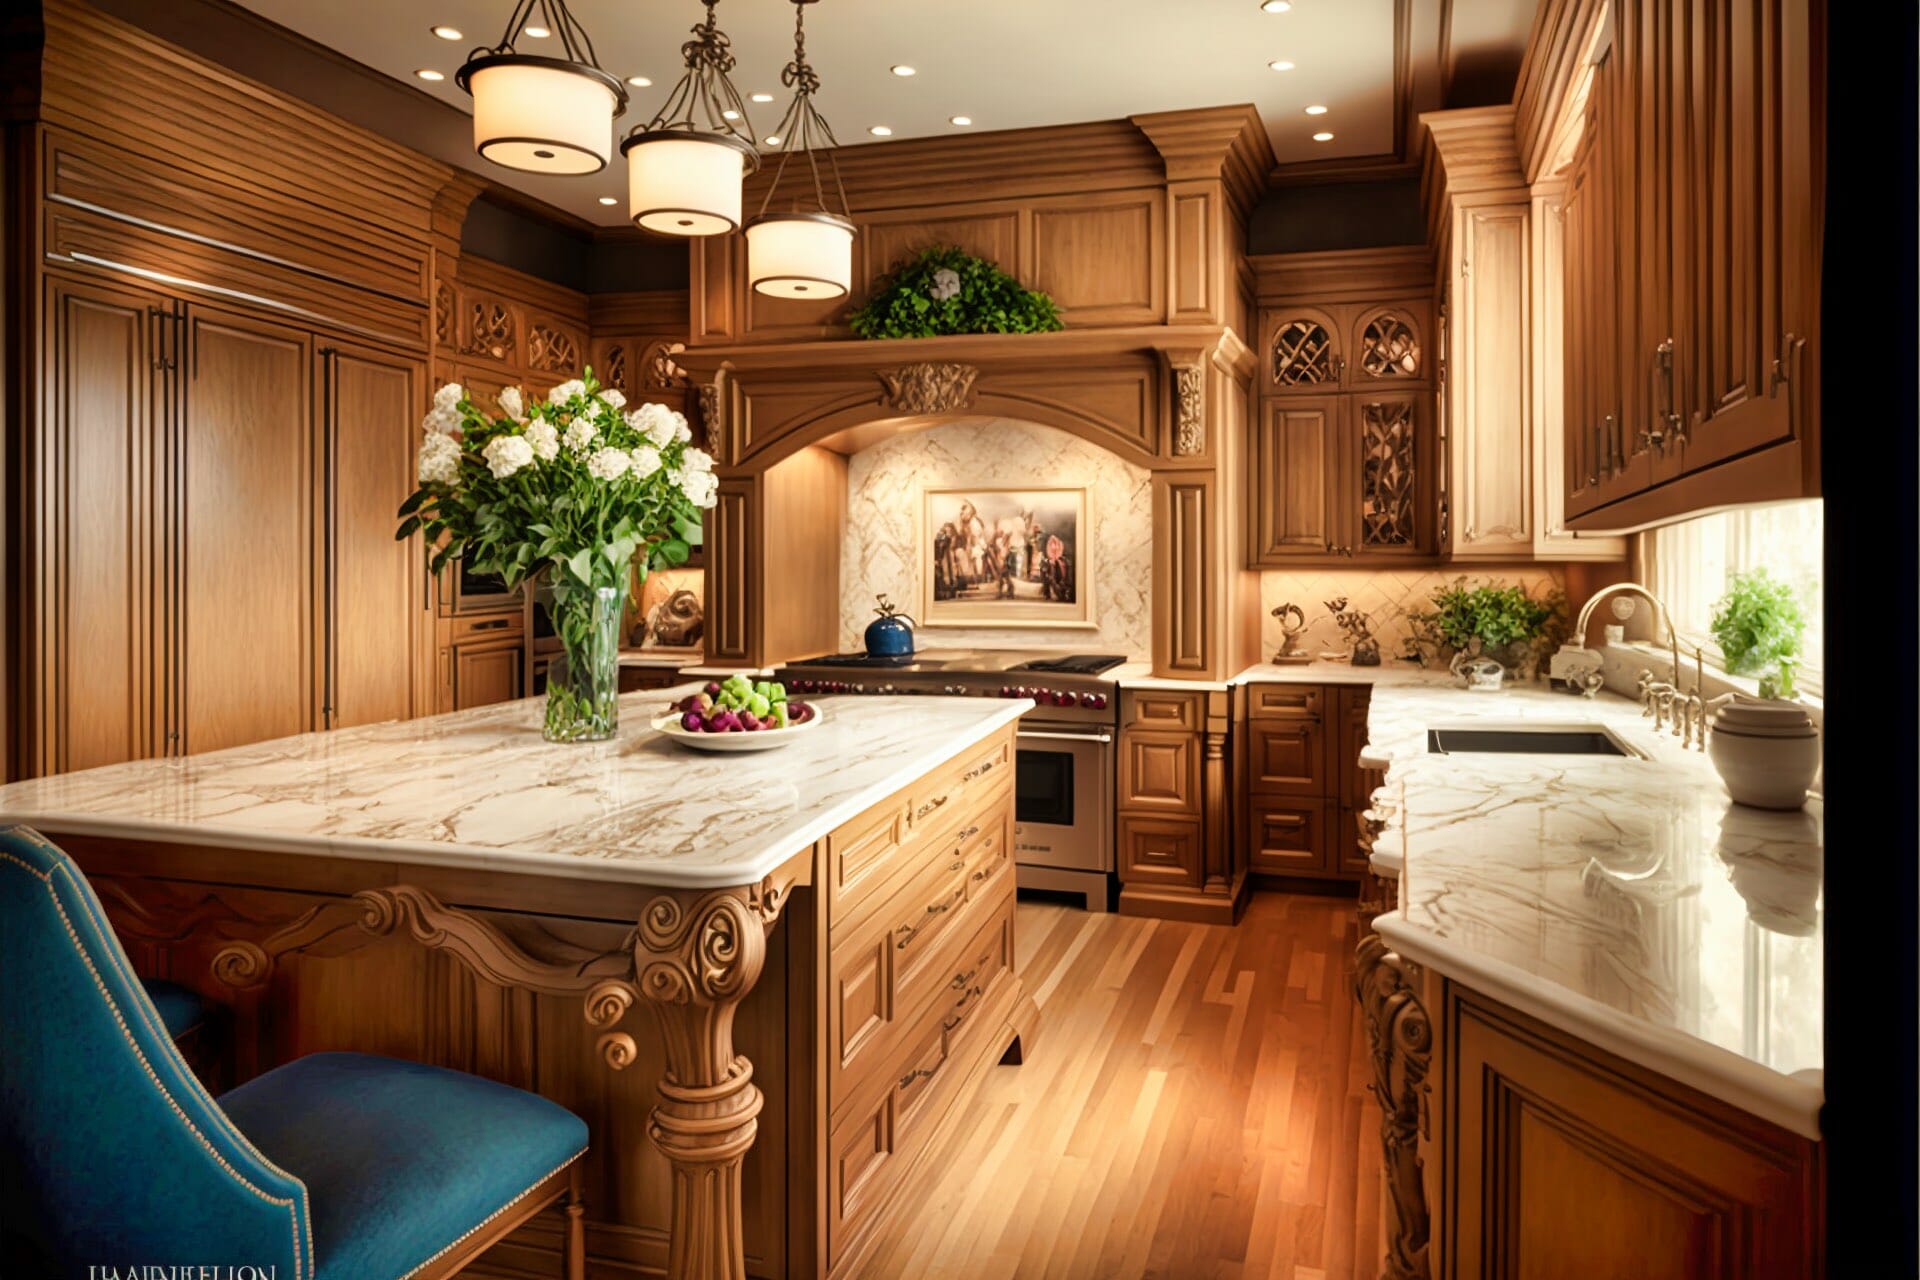 A Luxurious, Elegant Kitchen Featuring Light Oak Cabinetry, A Marble Backsplash, And A Large Marble-Topped Island.